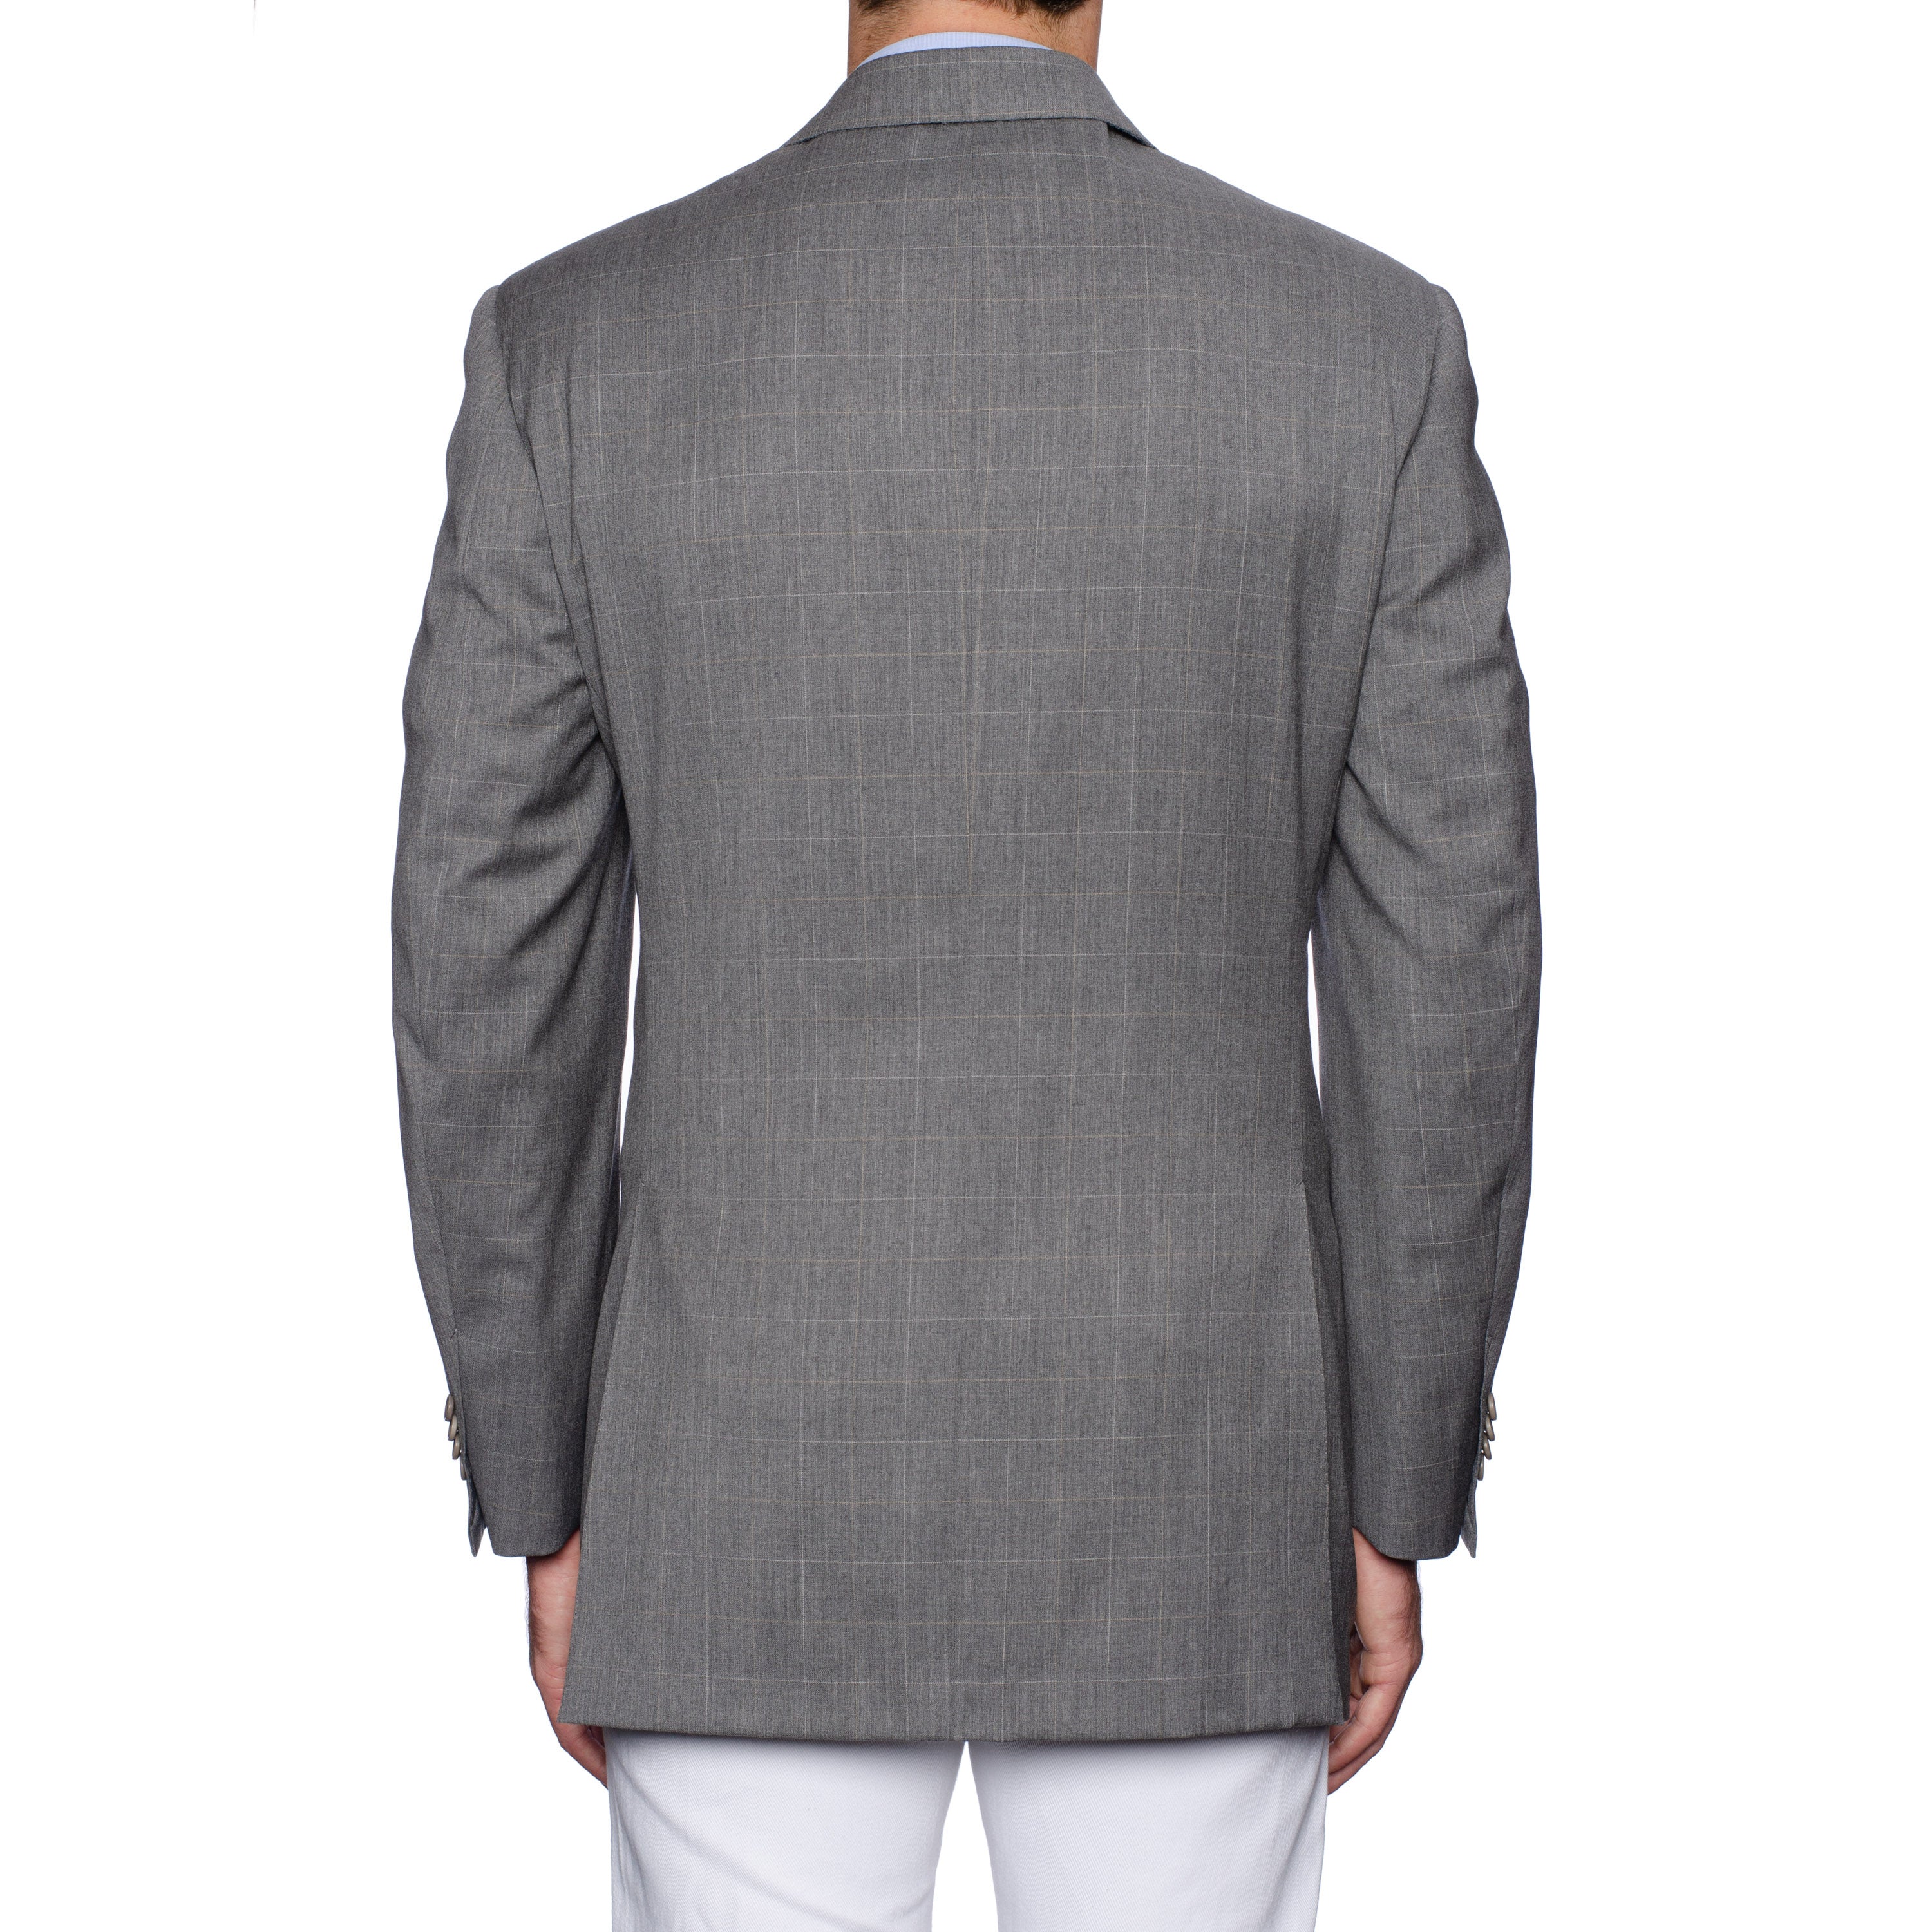 CASTANGIA 1850 Gray Wool Double Breasted Jacket EU 54 NEW US 44 CASTANGIA